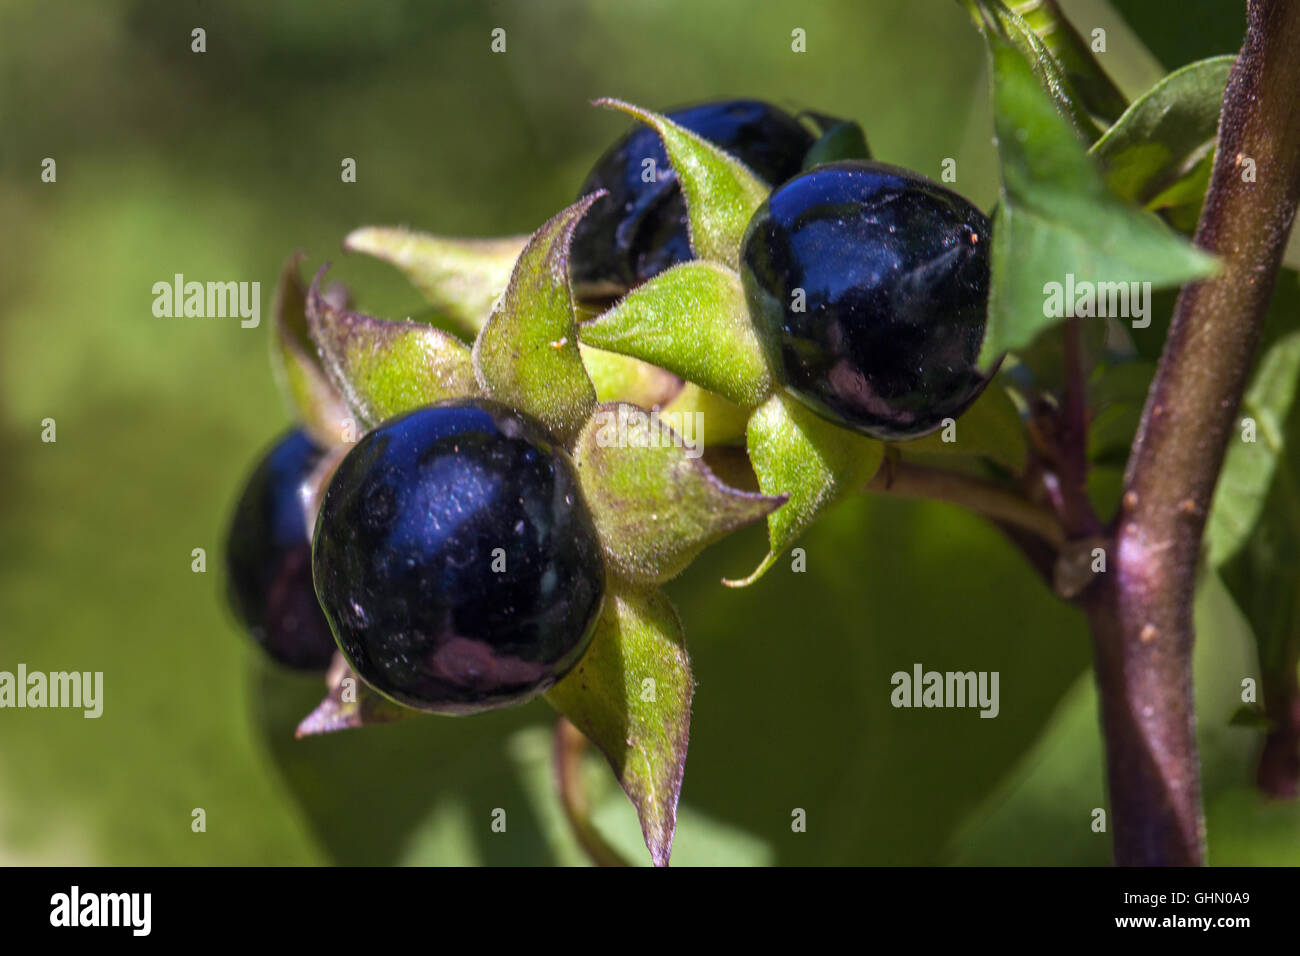 Deadly nightshade, Atropa belladonna poisonous and dangerous plant Stock Photo